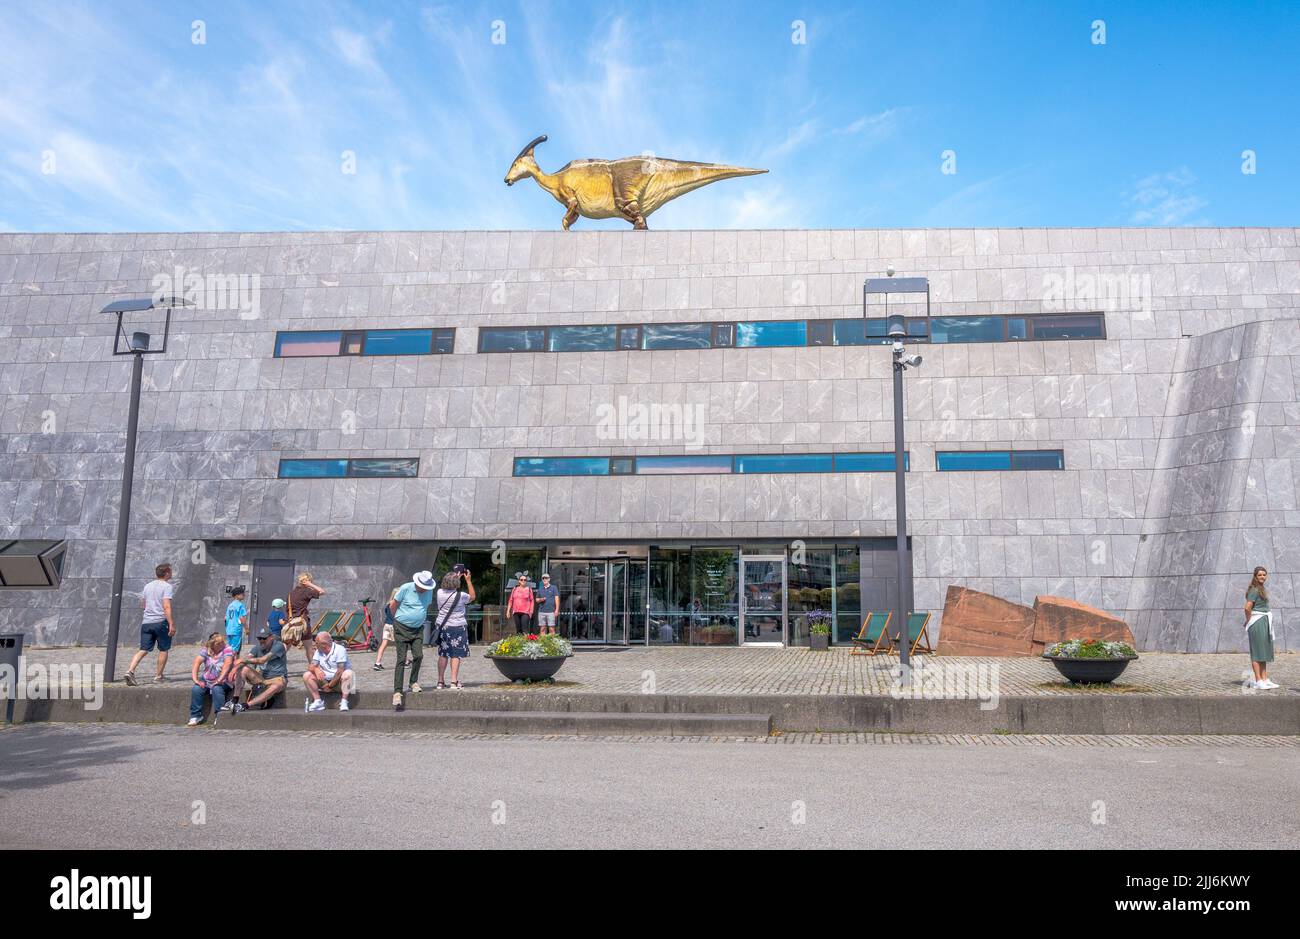 Norwegian Petroleum Museum, in the center of Stavanger, Norway showing a dinosaur exhibition “Witnessing oil”. Stock Photo